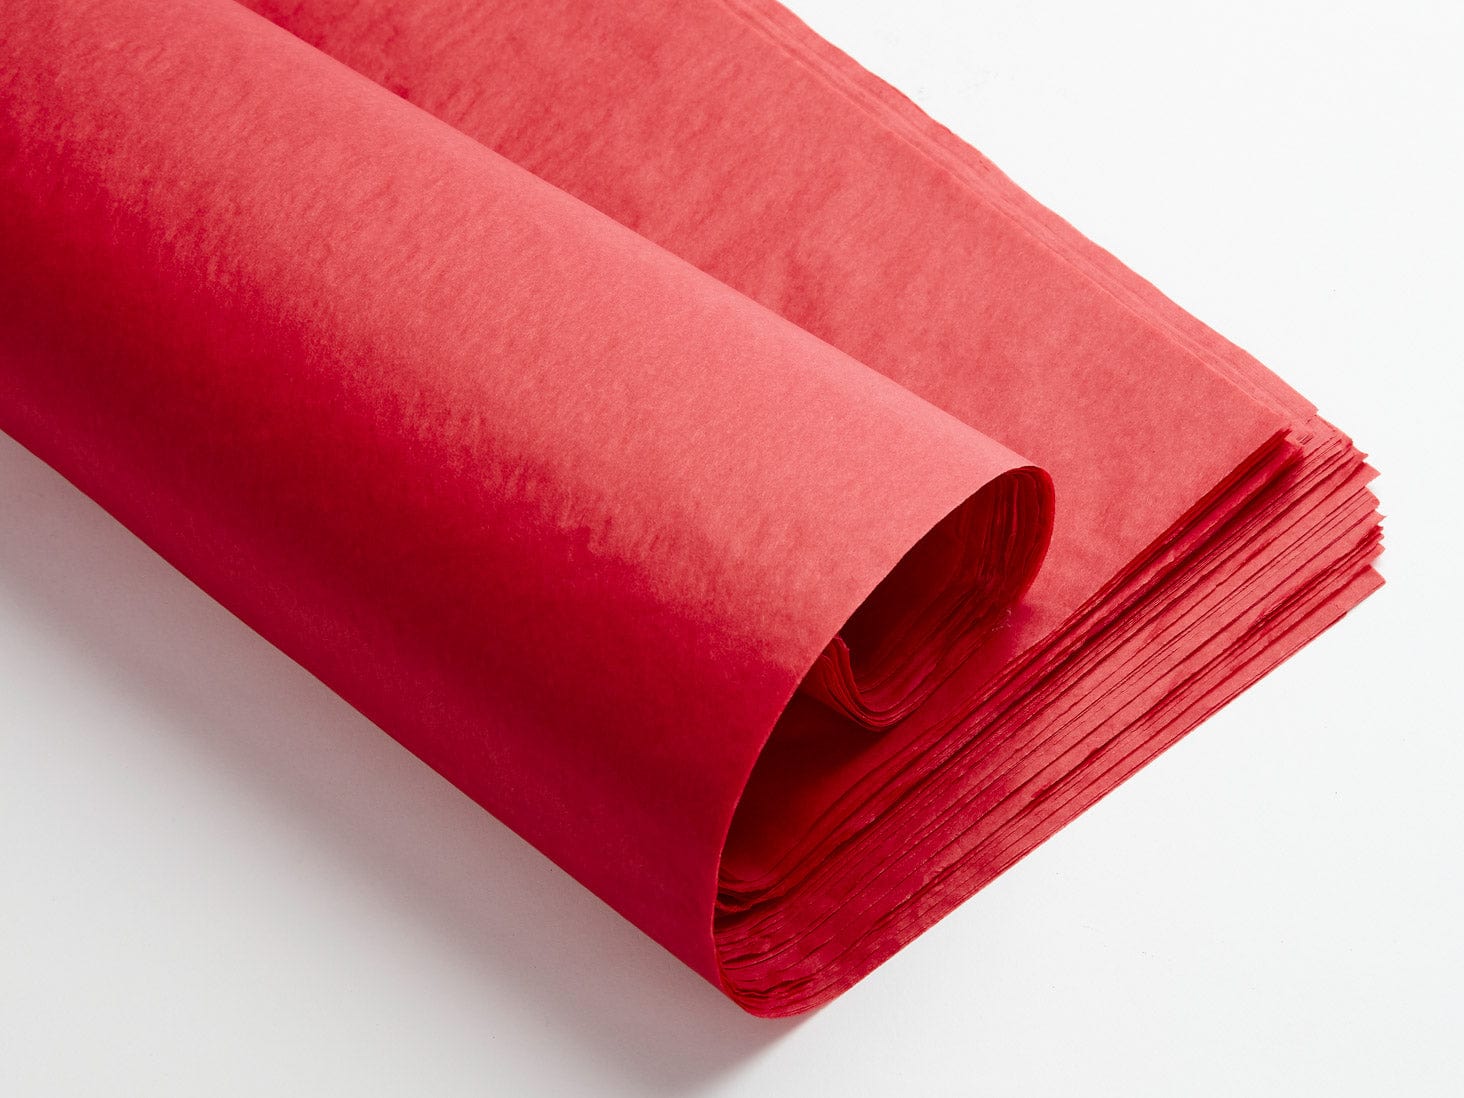 Foldabox launches a new and beautiful range of luxury quality tissue papers